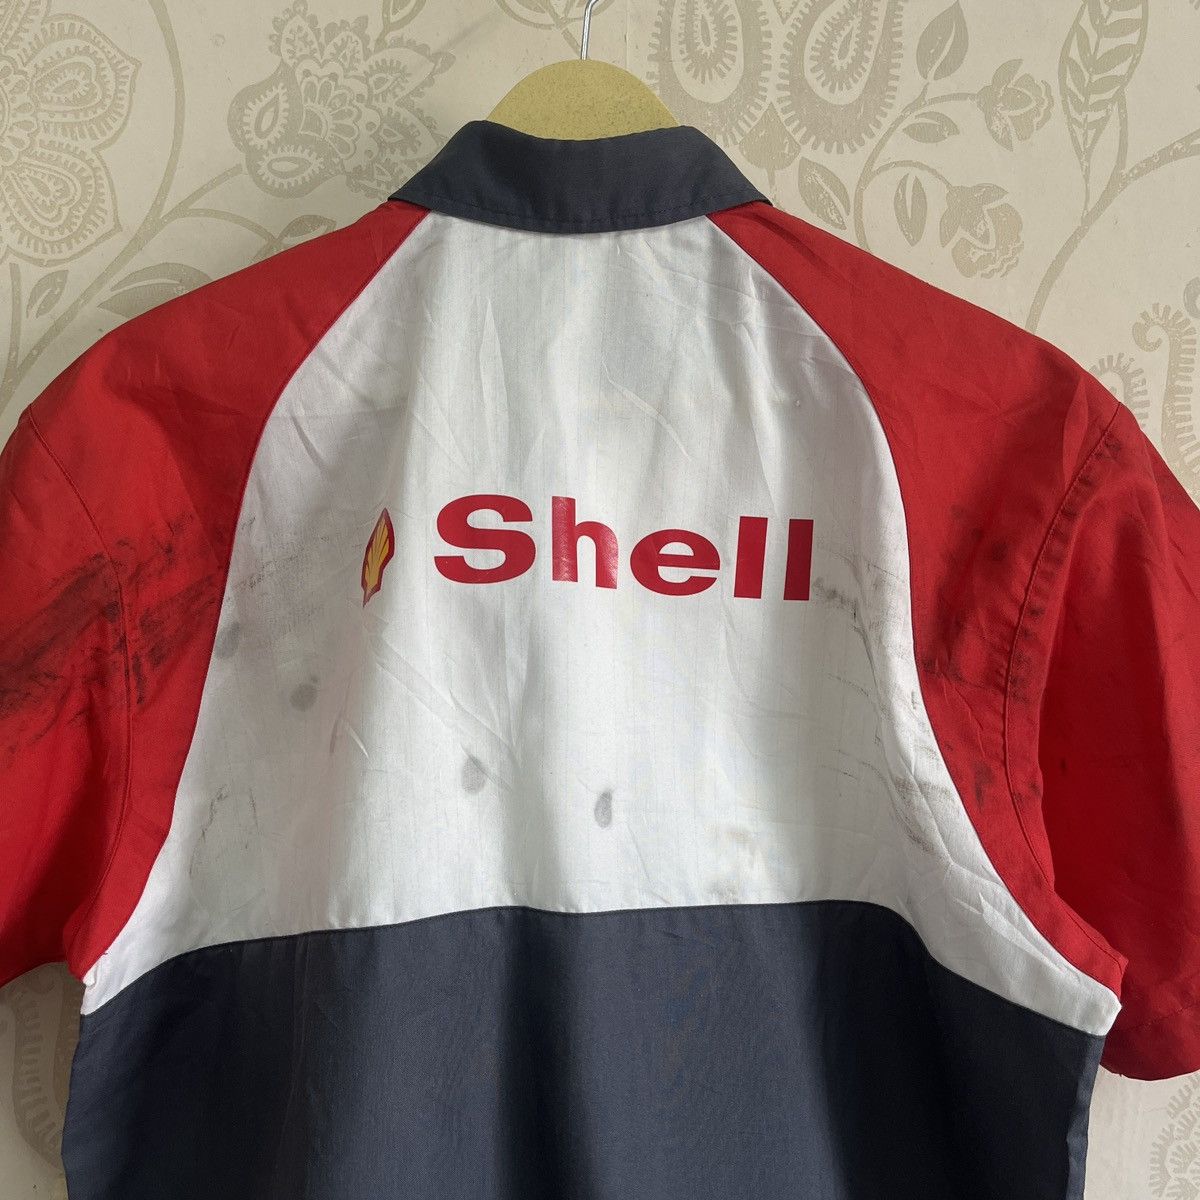 Vintage Shell Workers Uniform Shirts Japan - 18